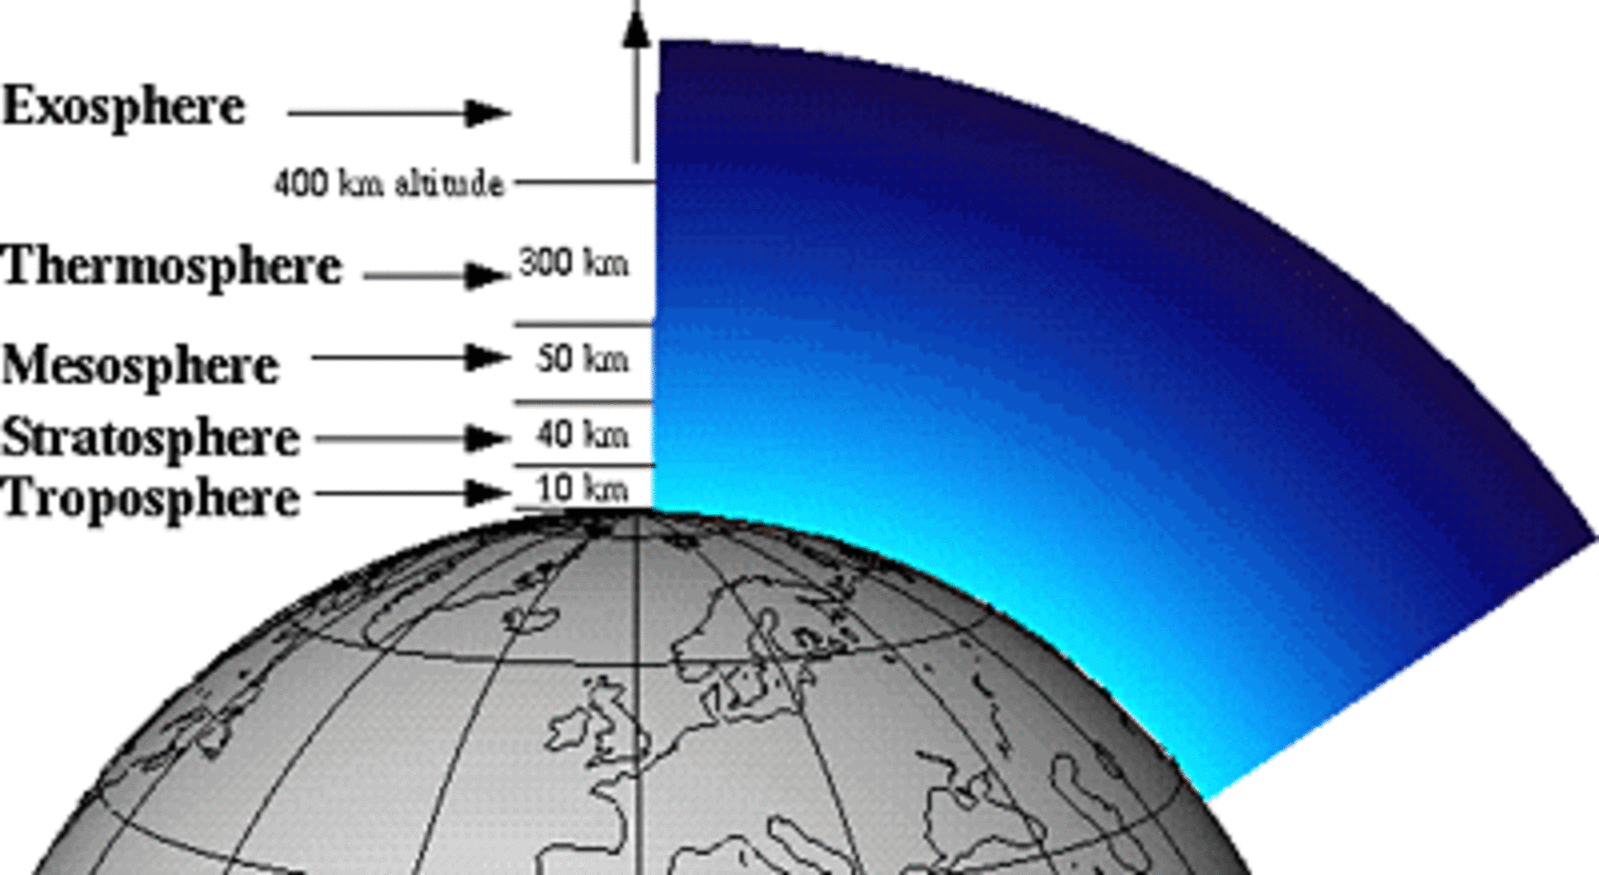 The troposphere is the part of the atmosphere closest to Earth’s surface and includes the air we breathe.